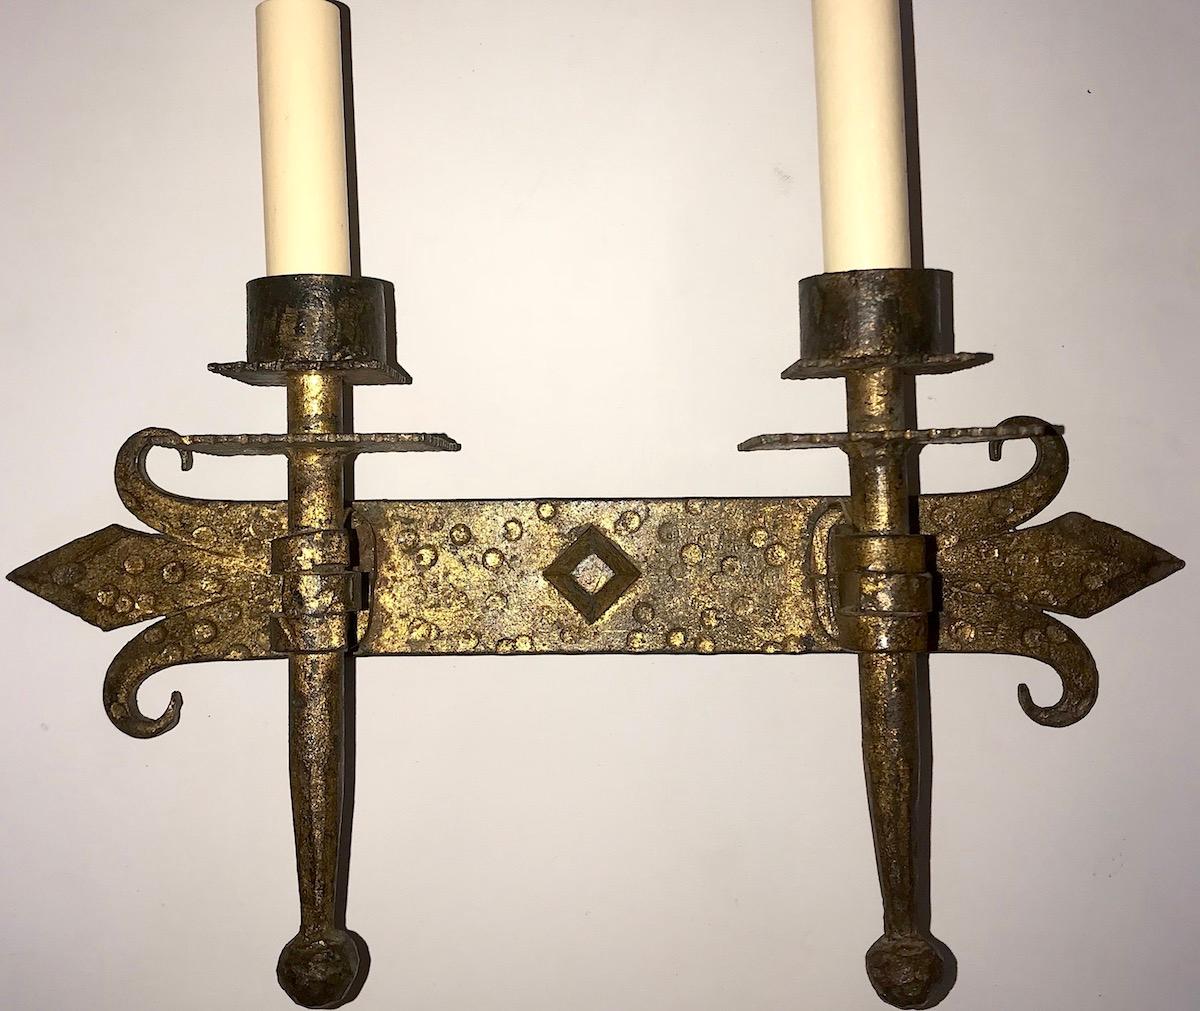 A set of 12, circa 1940s Spanish hammered wrought iron sconces with original gilt finish.

Measurements:
Height 11